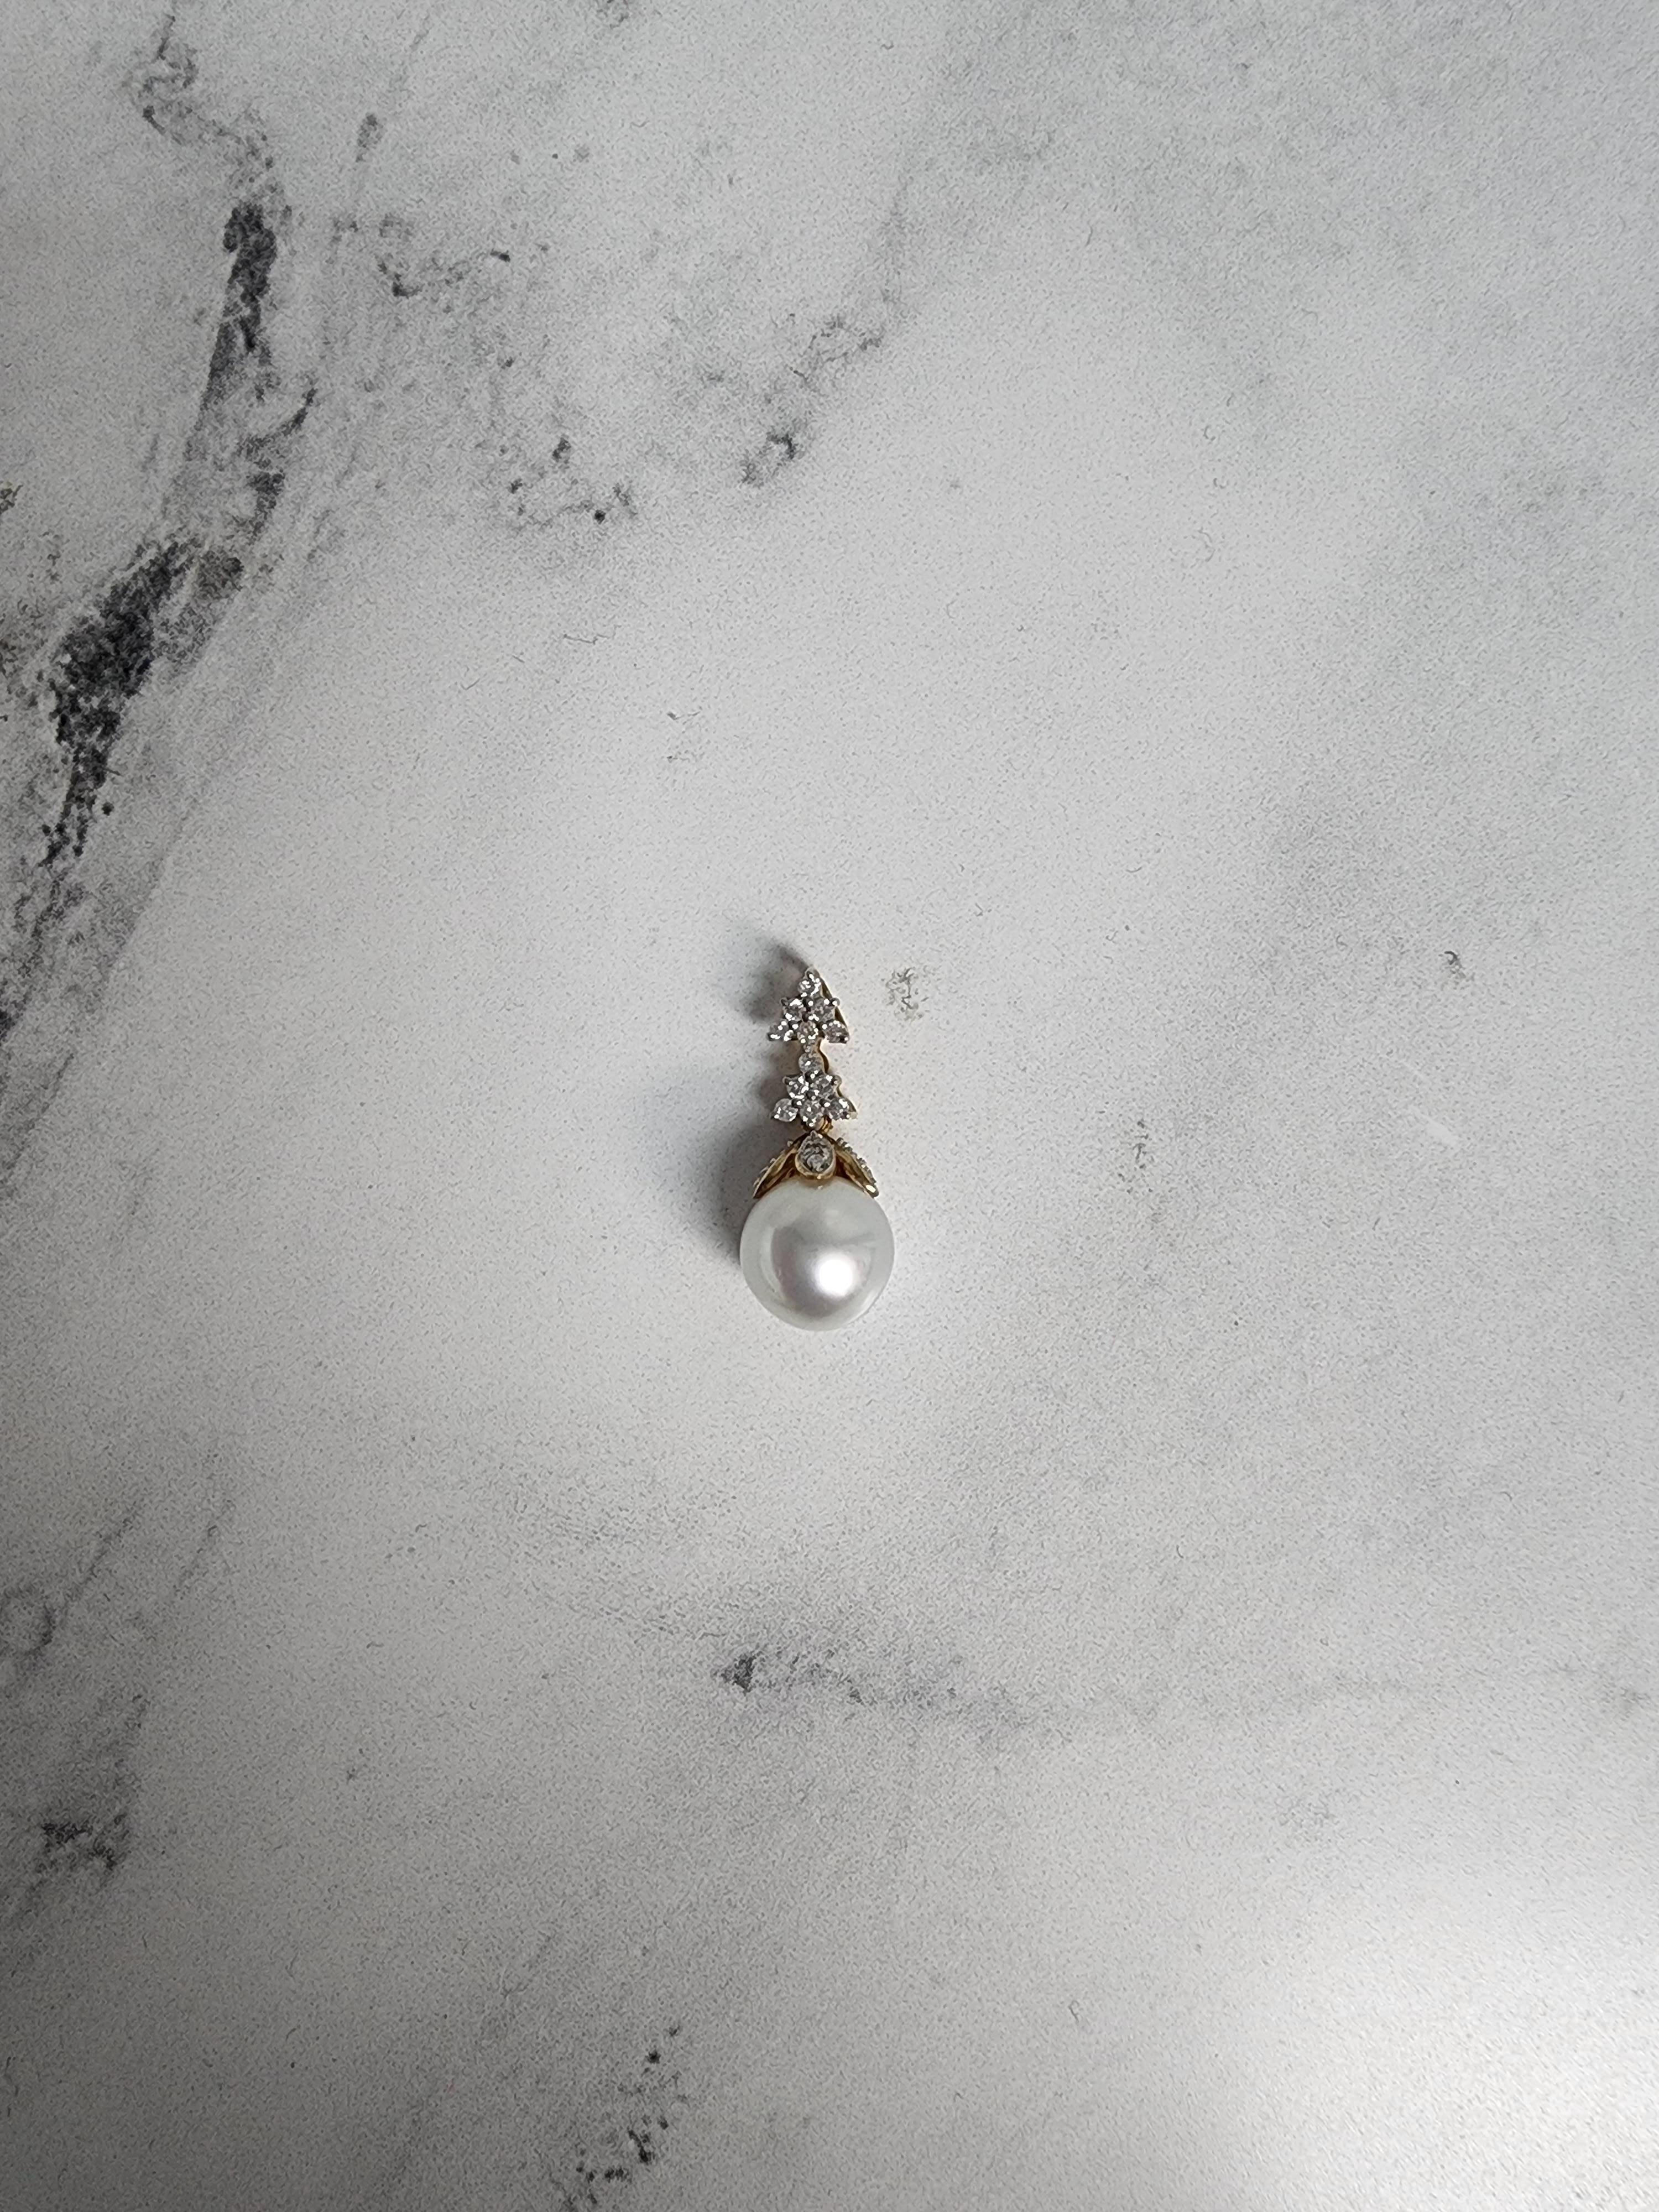 10mm Dangling Pearl Necklace with Diamond Accents .25cttw 14k Yellow Gold In New Condition For Sale In Sugar Land, TX